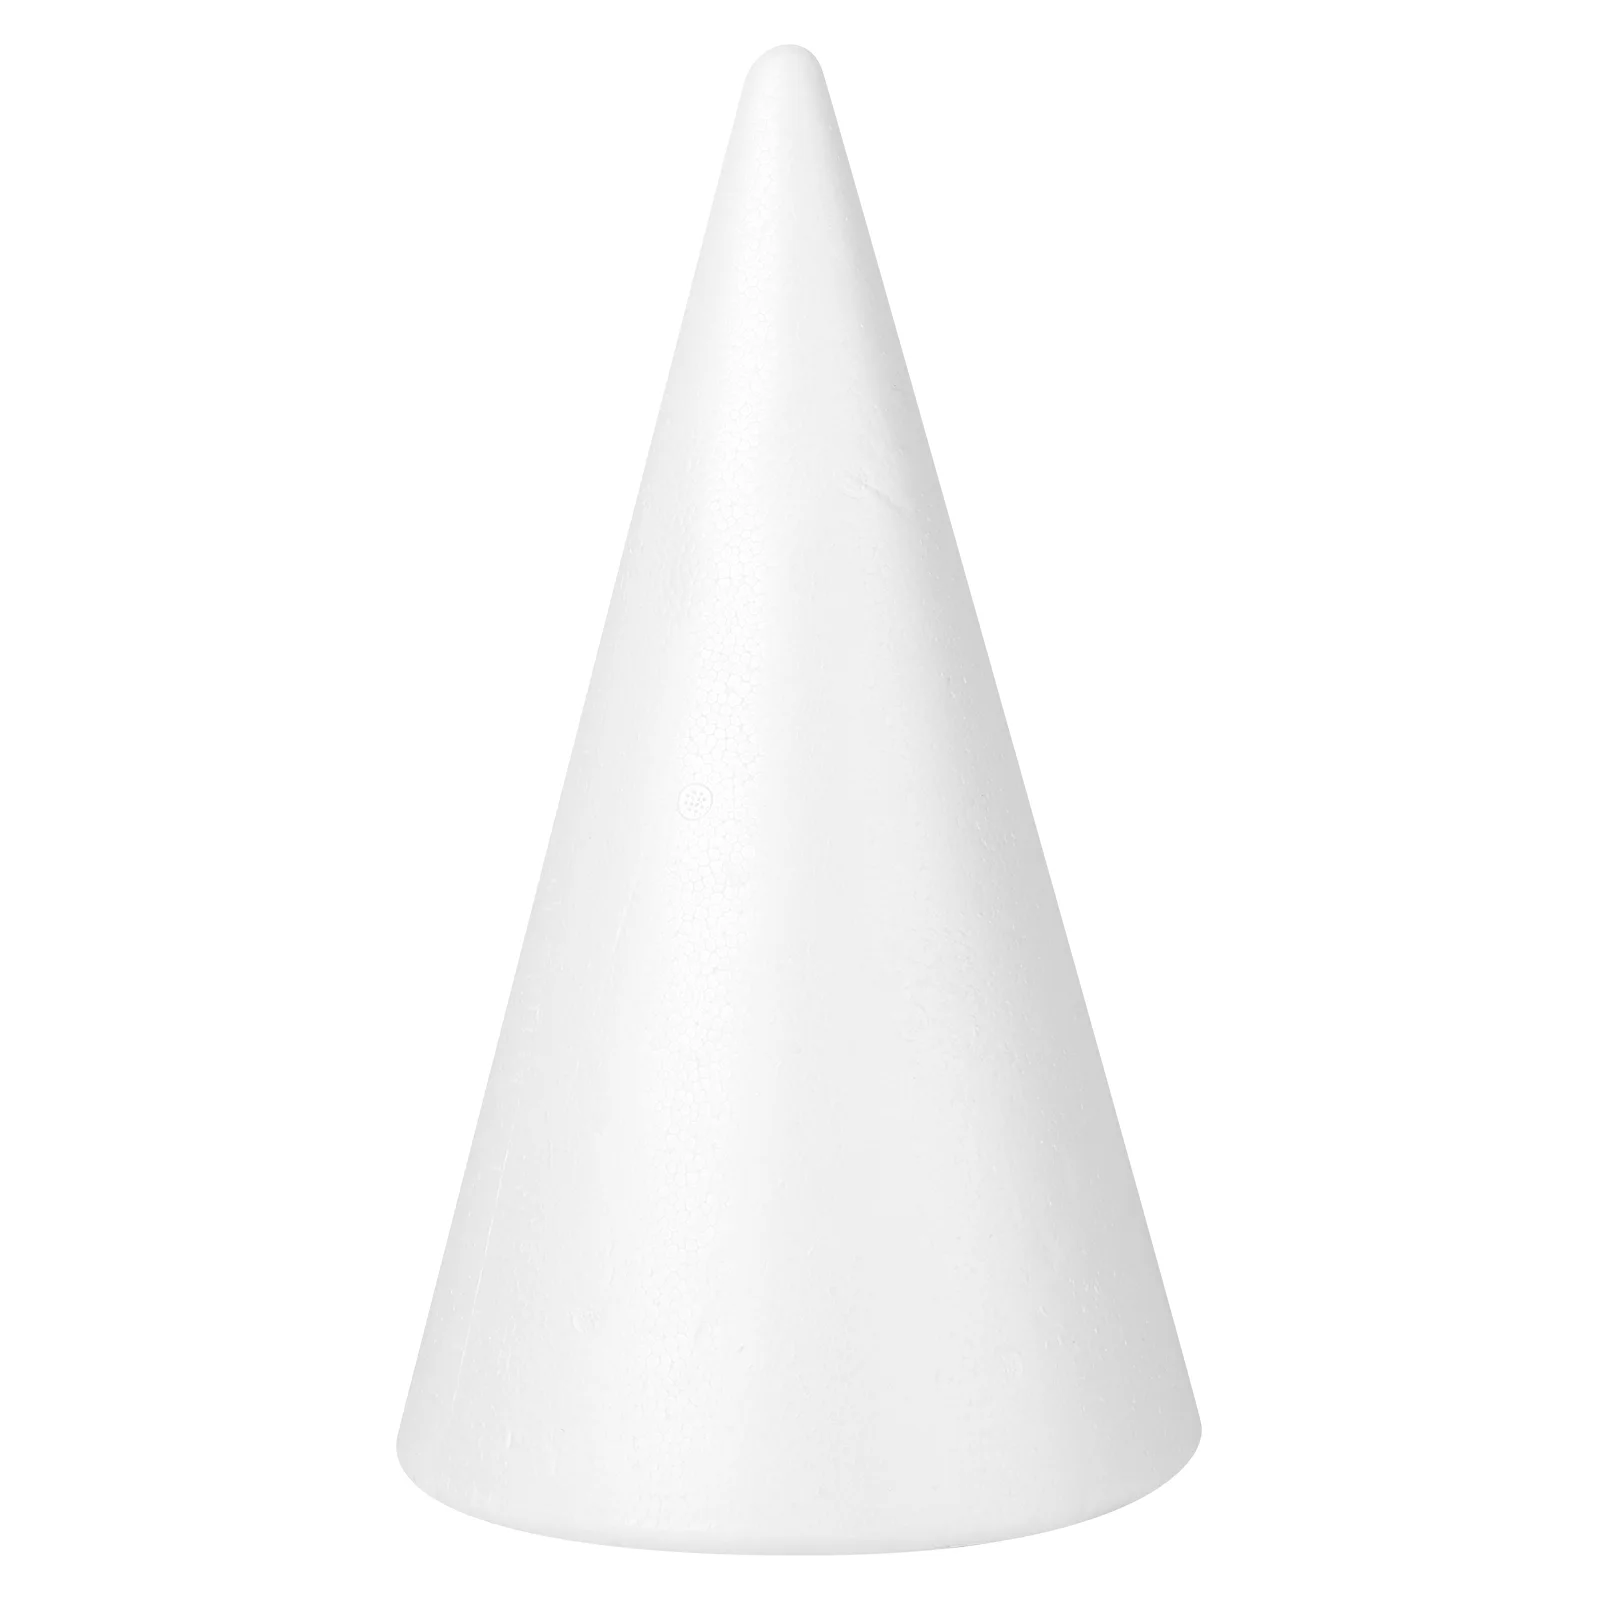 

Foam Cone Cones Styrofoam Craft Christmas Tree Diy Crafts Polystyrene White Floral Shapes Children Modeling Shaped Kids Supplies